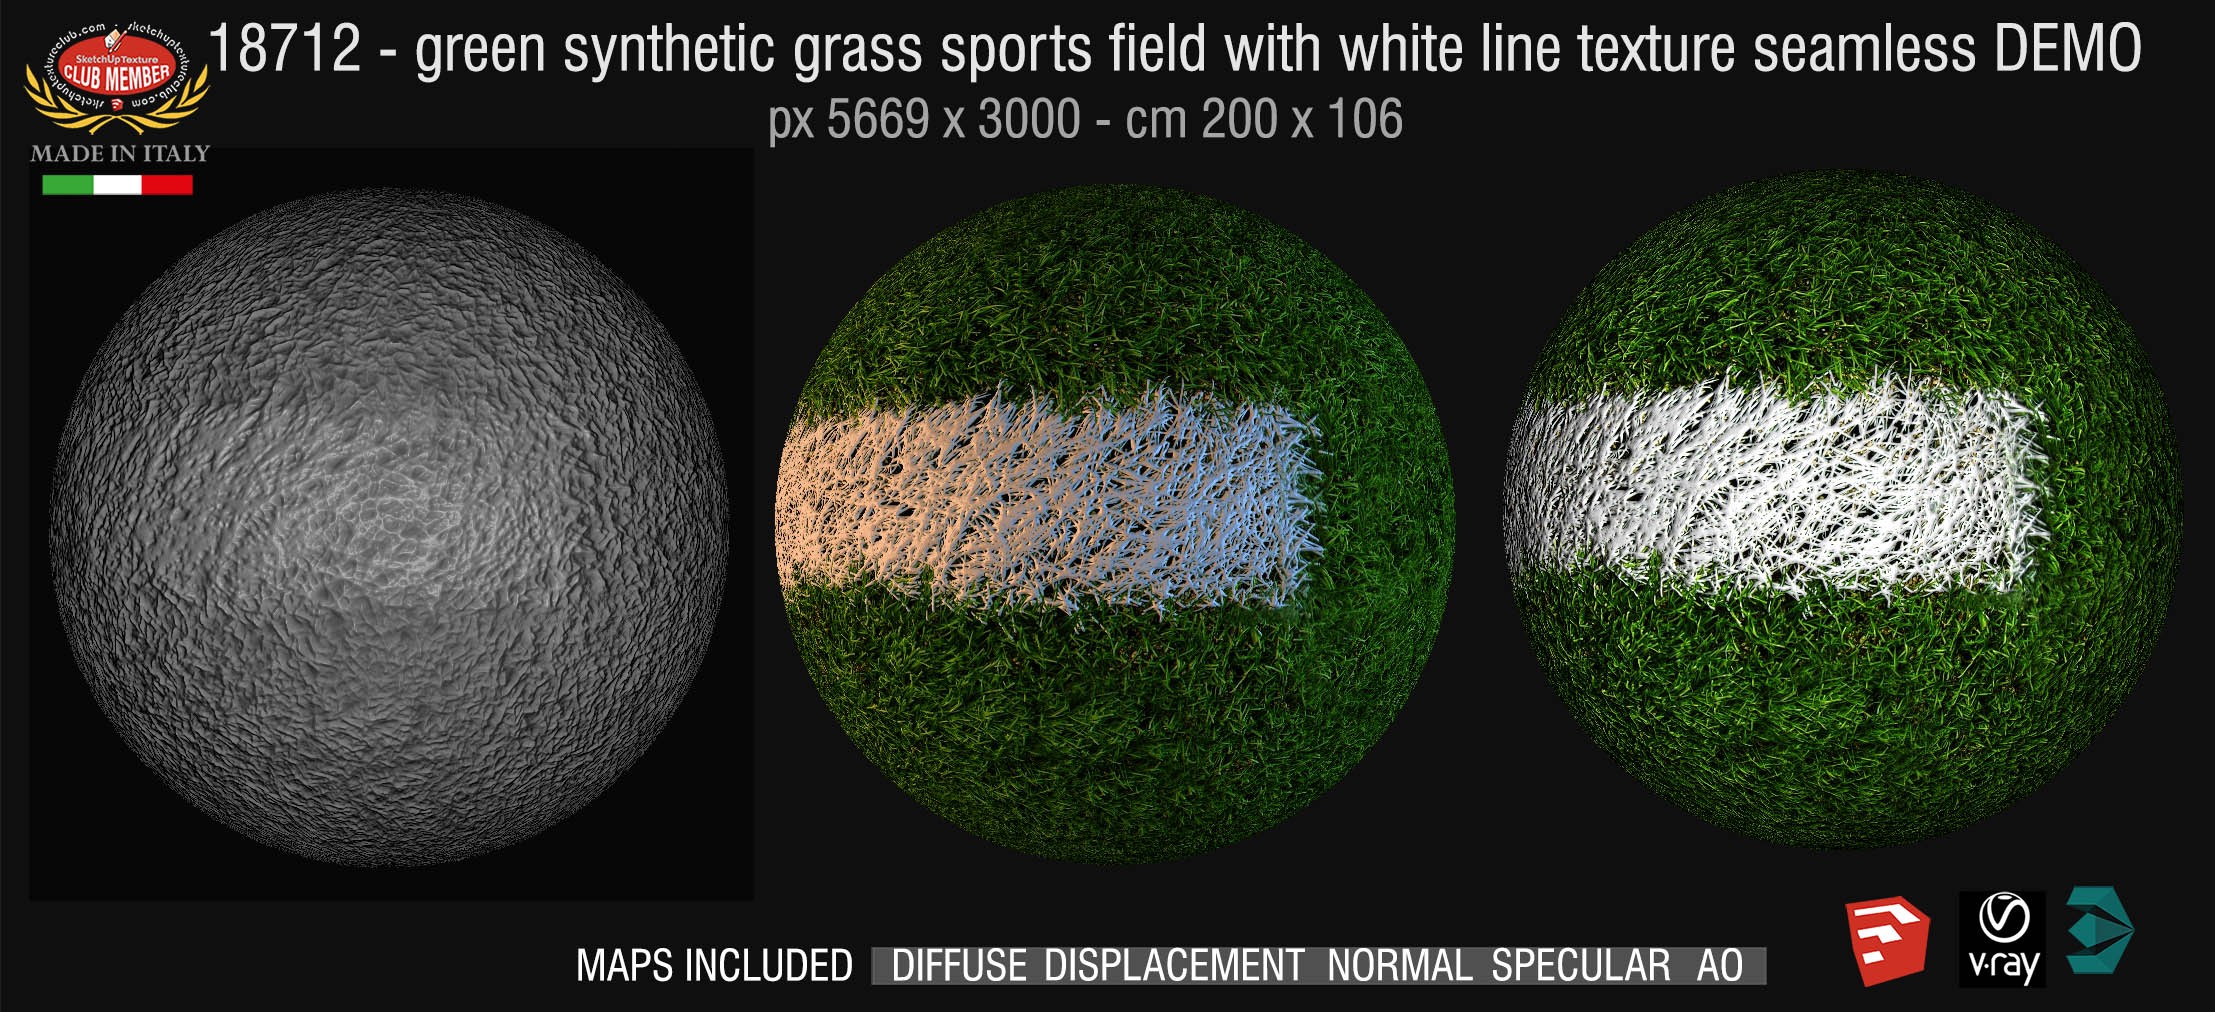 18712 HR Green synthetic grass sports field with white line texture + maps DEMO